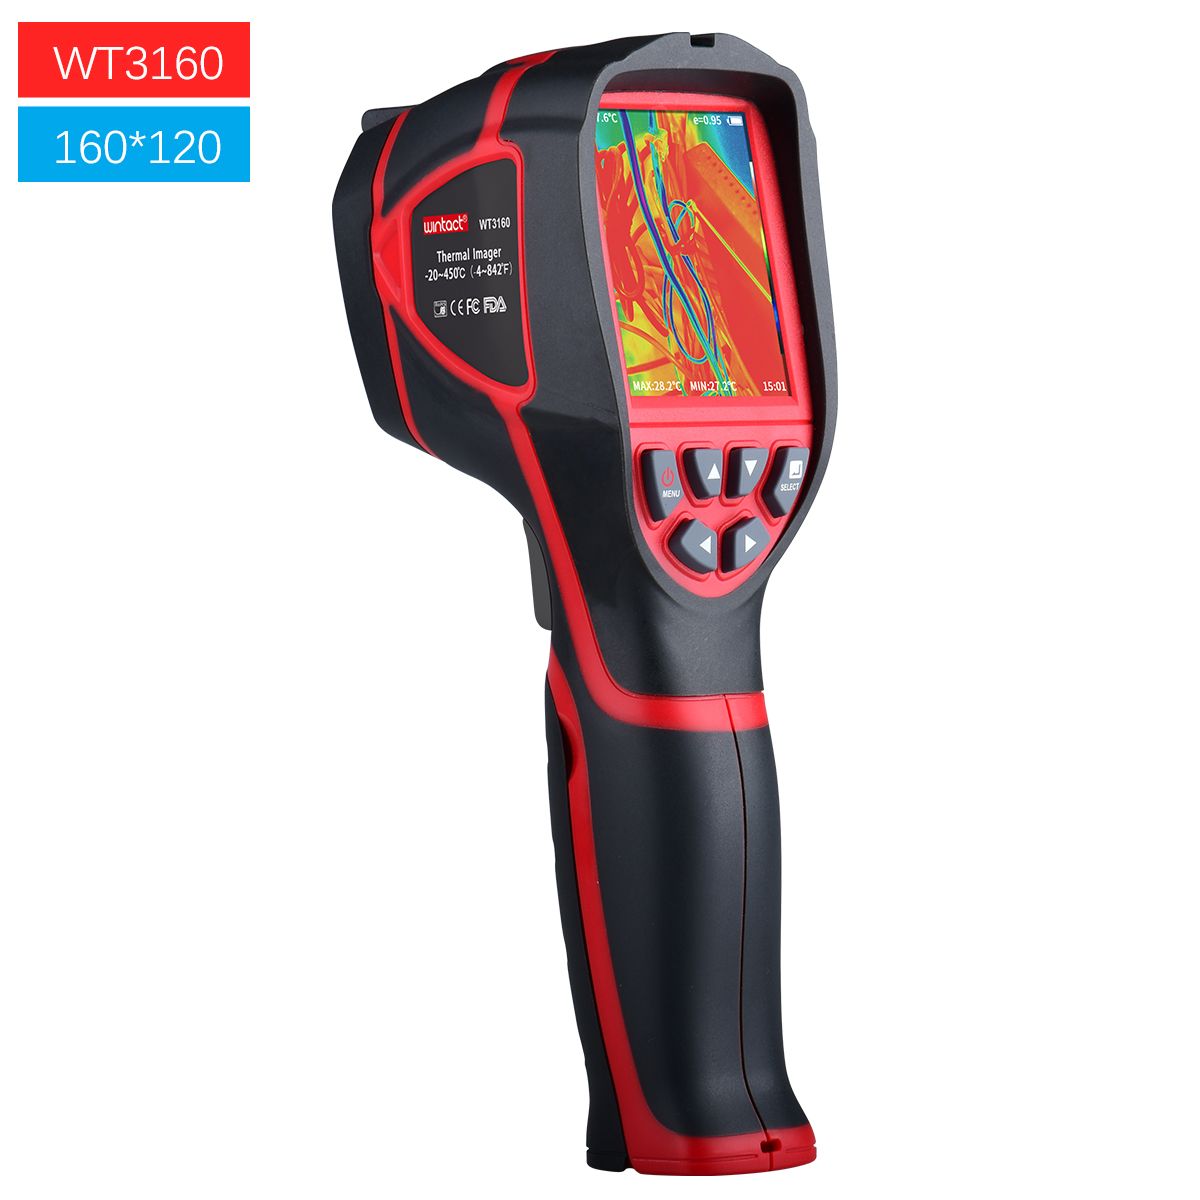 WT3160-Digital-Infrared-Thermal-Imager-28inch-Color-Screen-160120-Infrared-Image-Resolution-Professi-1757743